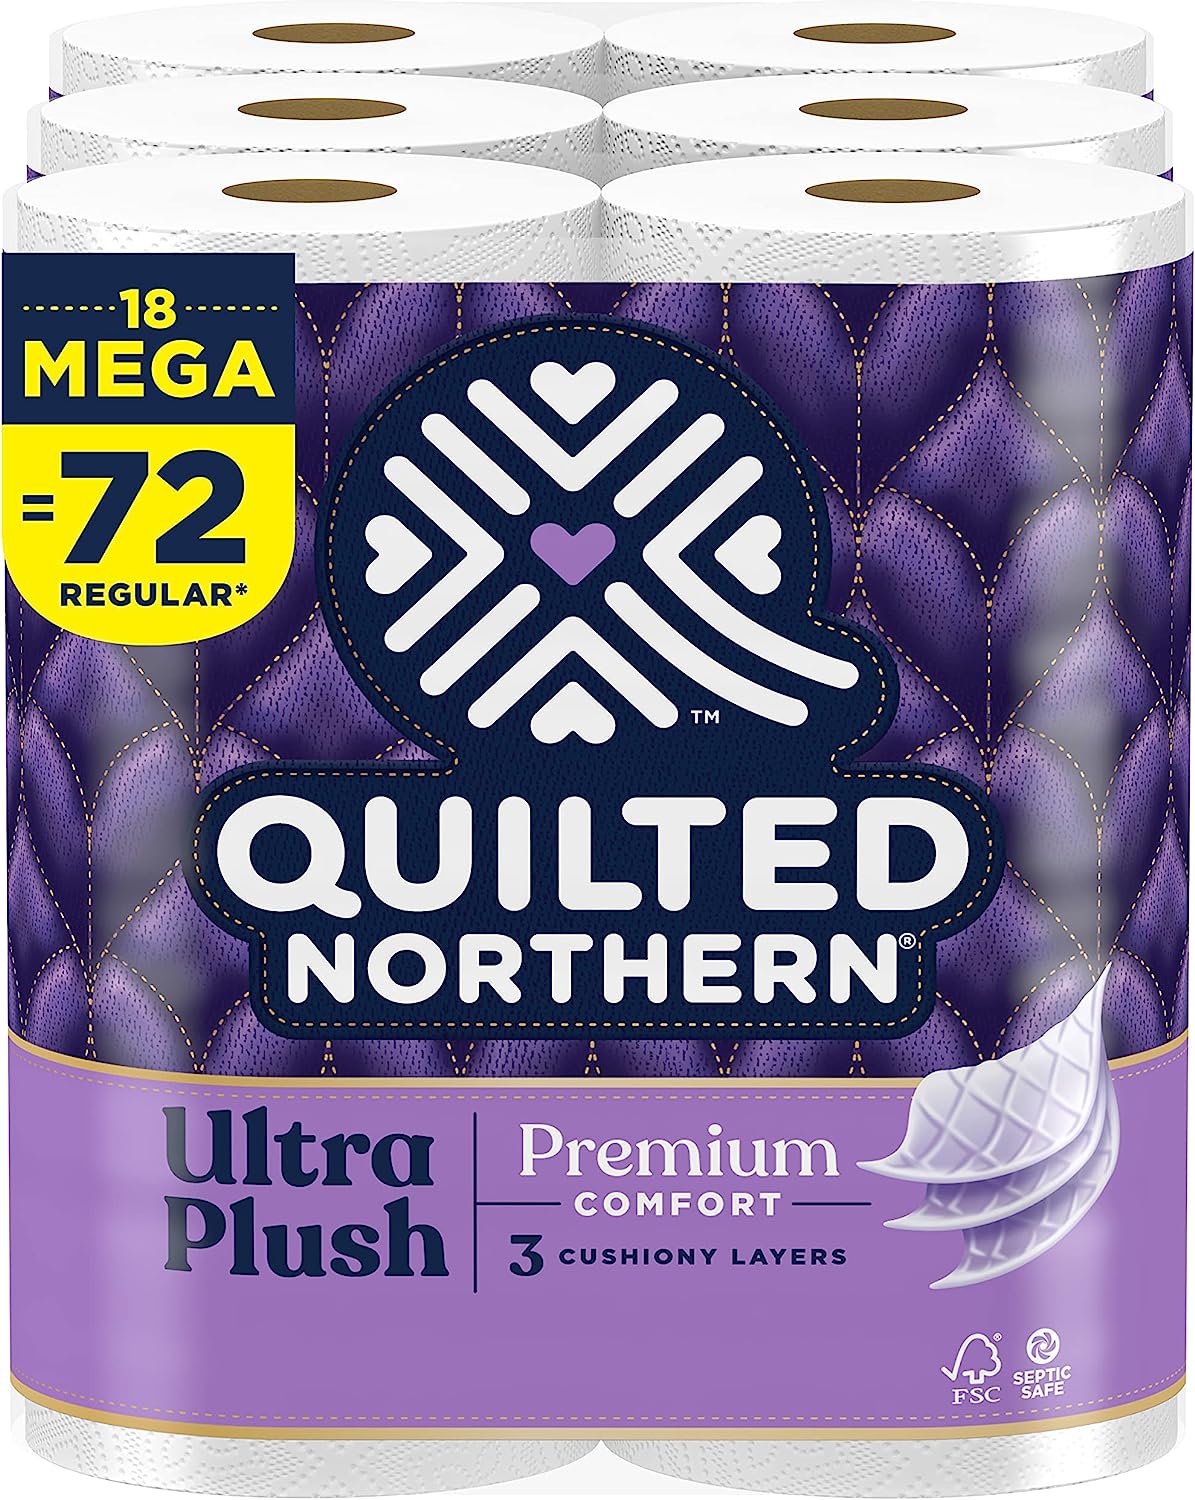 Quilted Northern Ultra Plush Toilet Paper, 18 Mega [...]